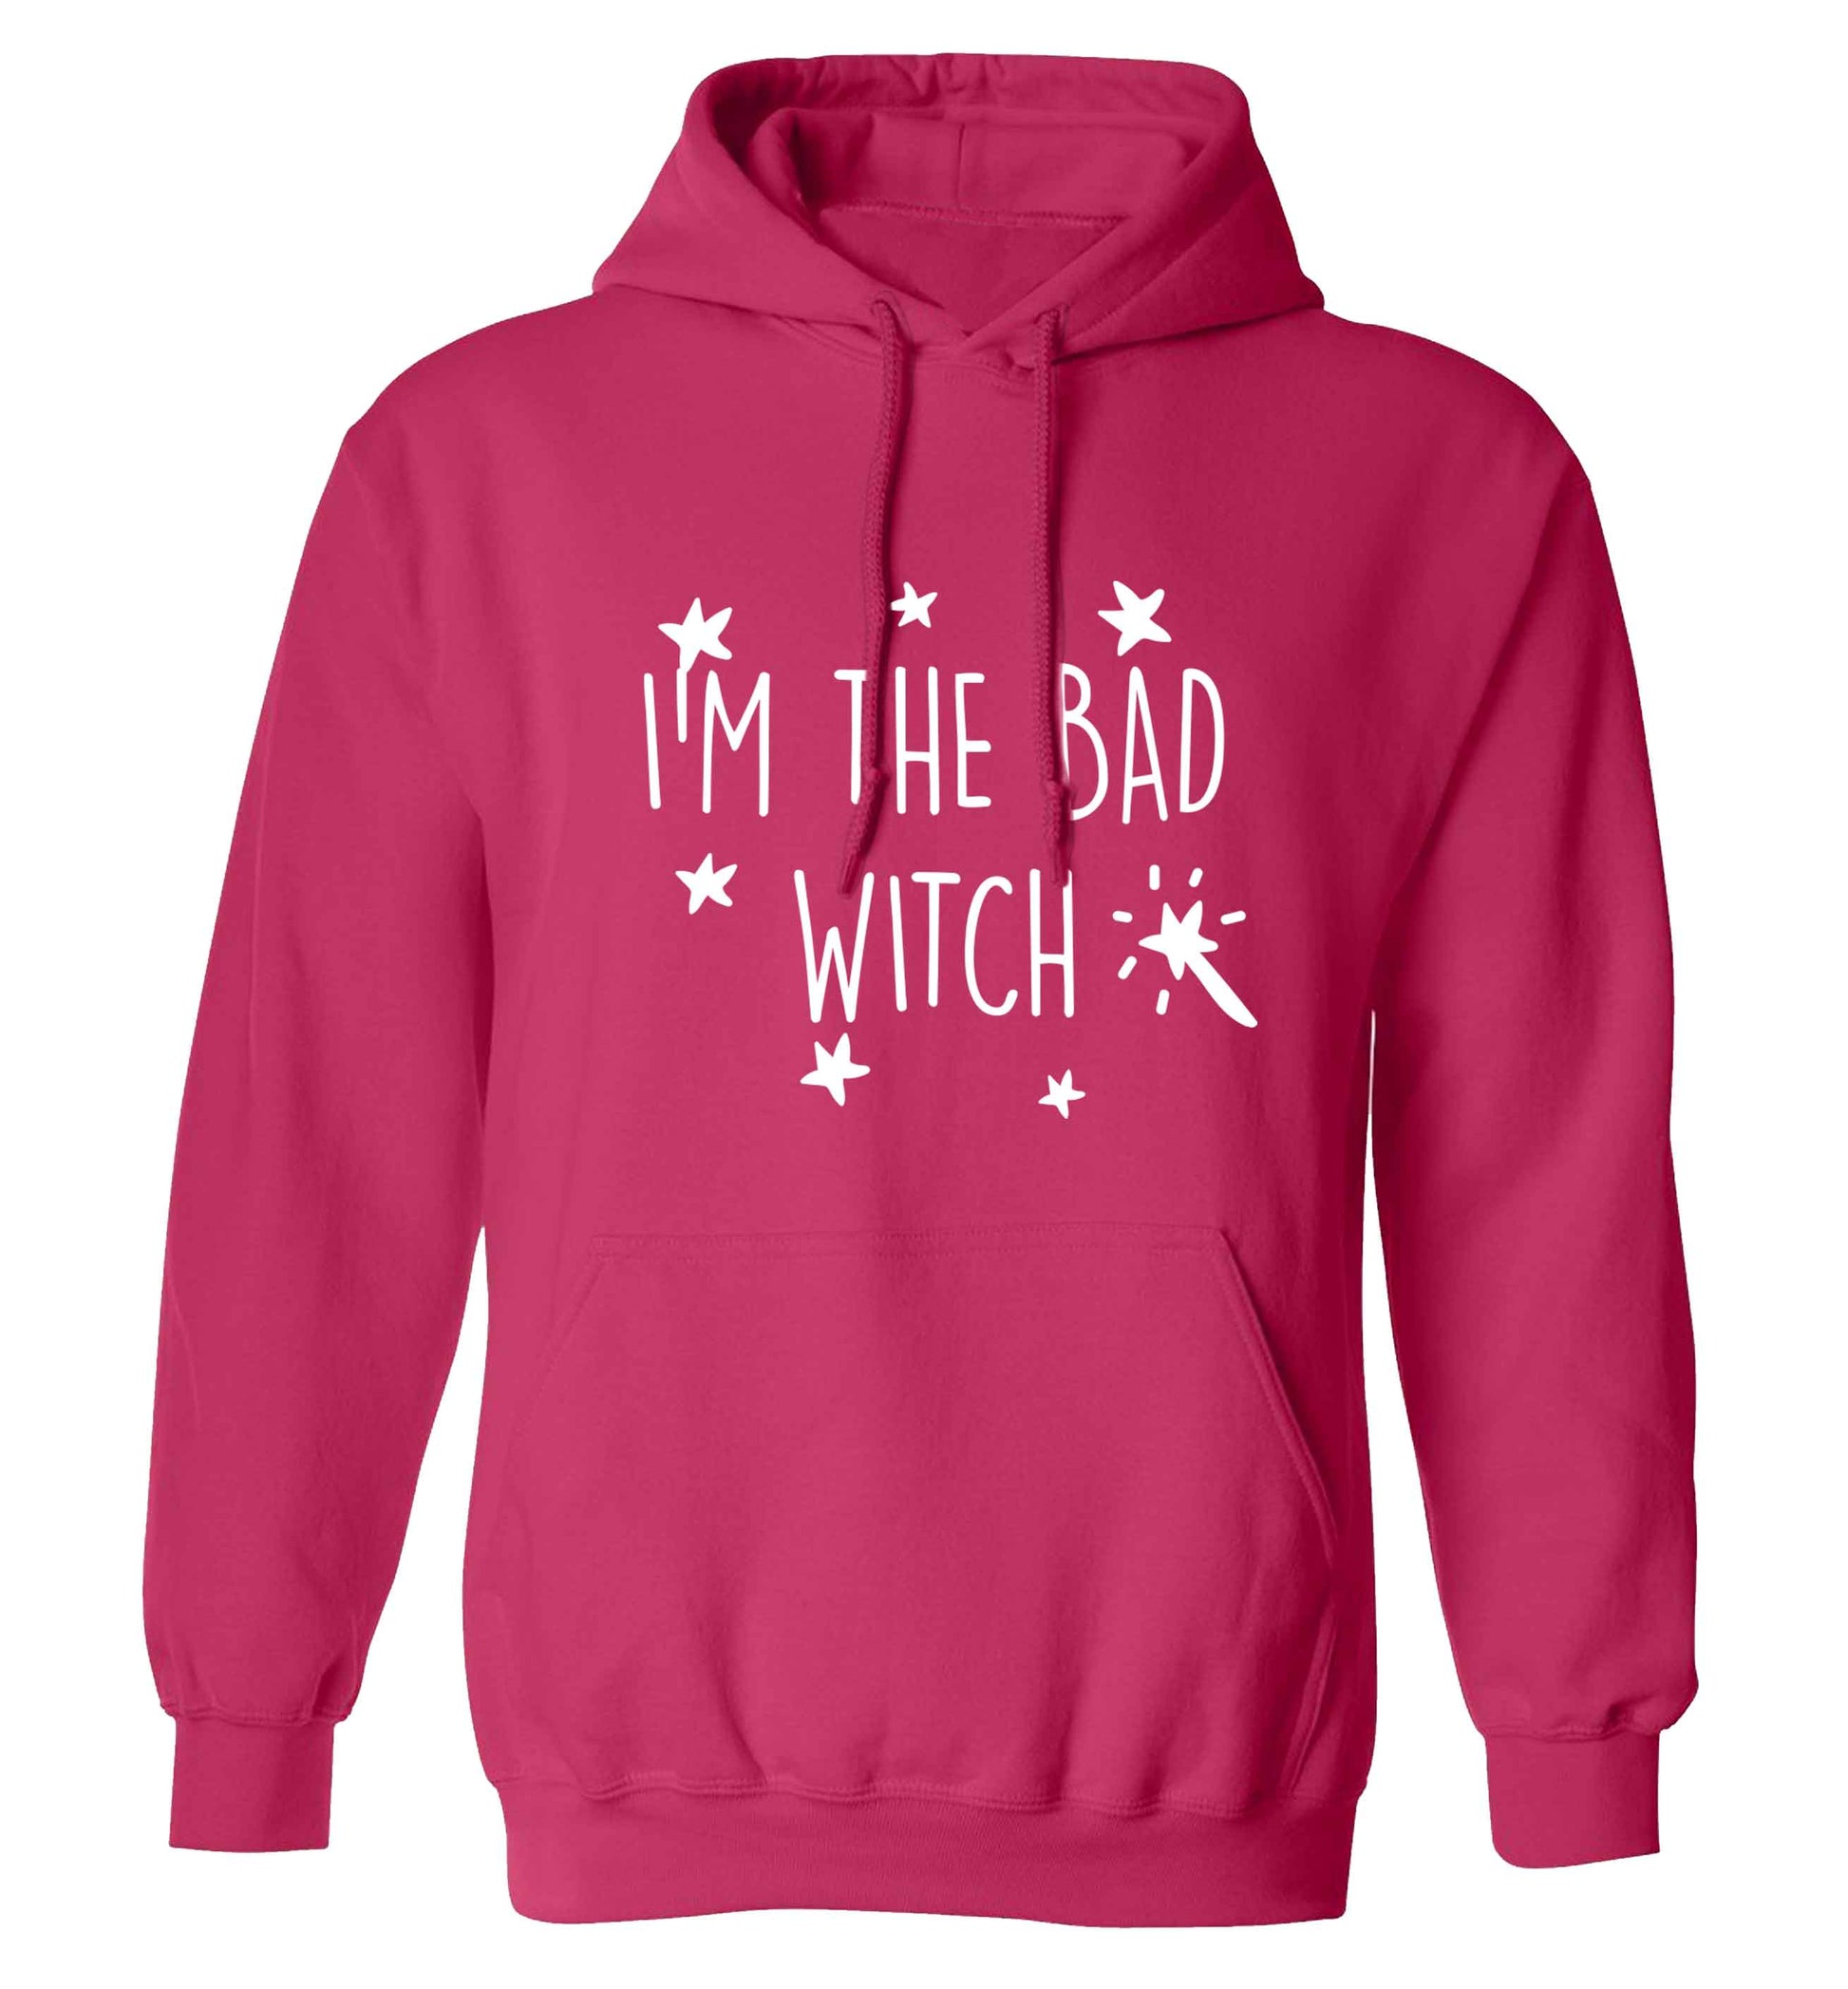 Bad witch adults unisex pink hoodie 2XL